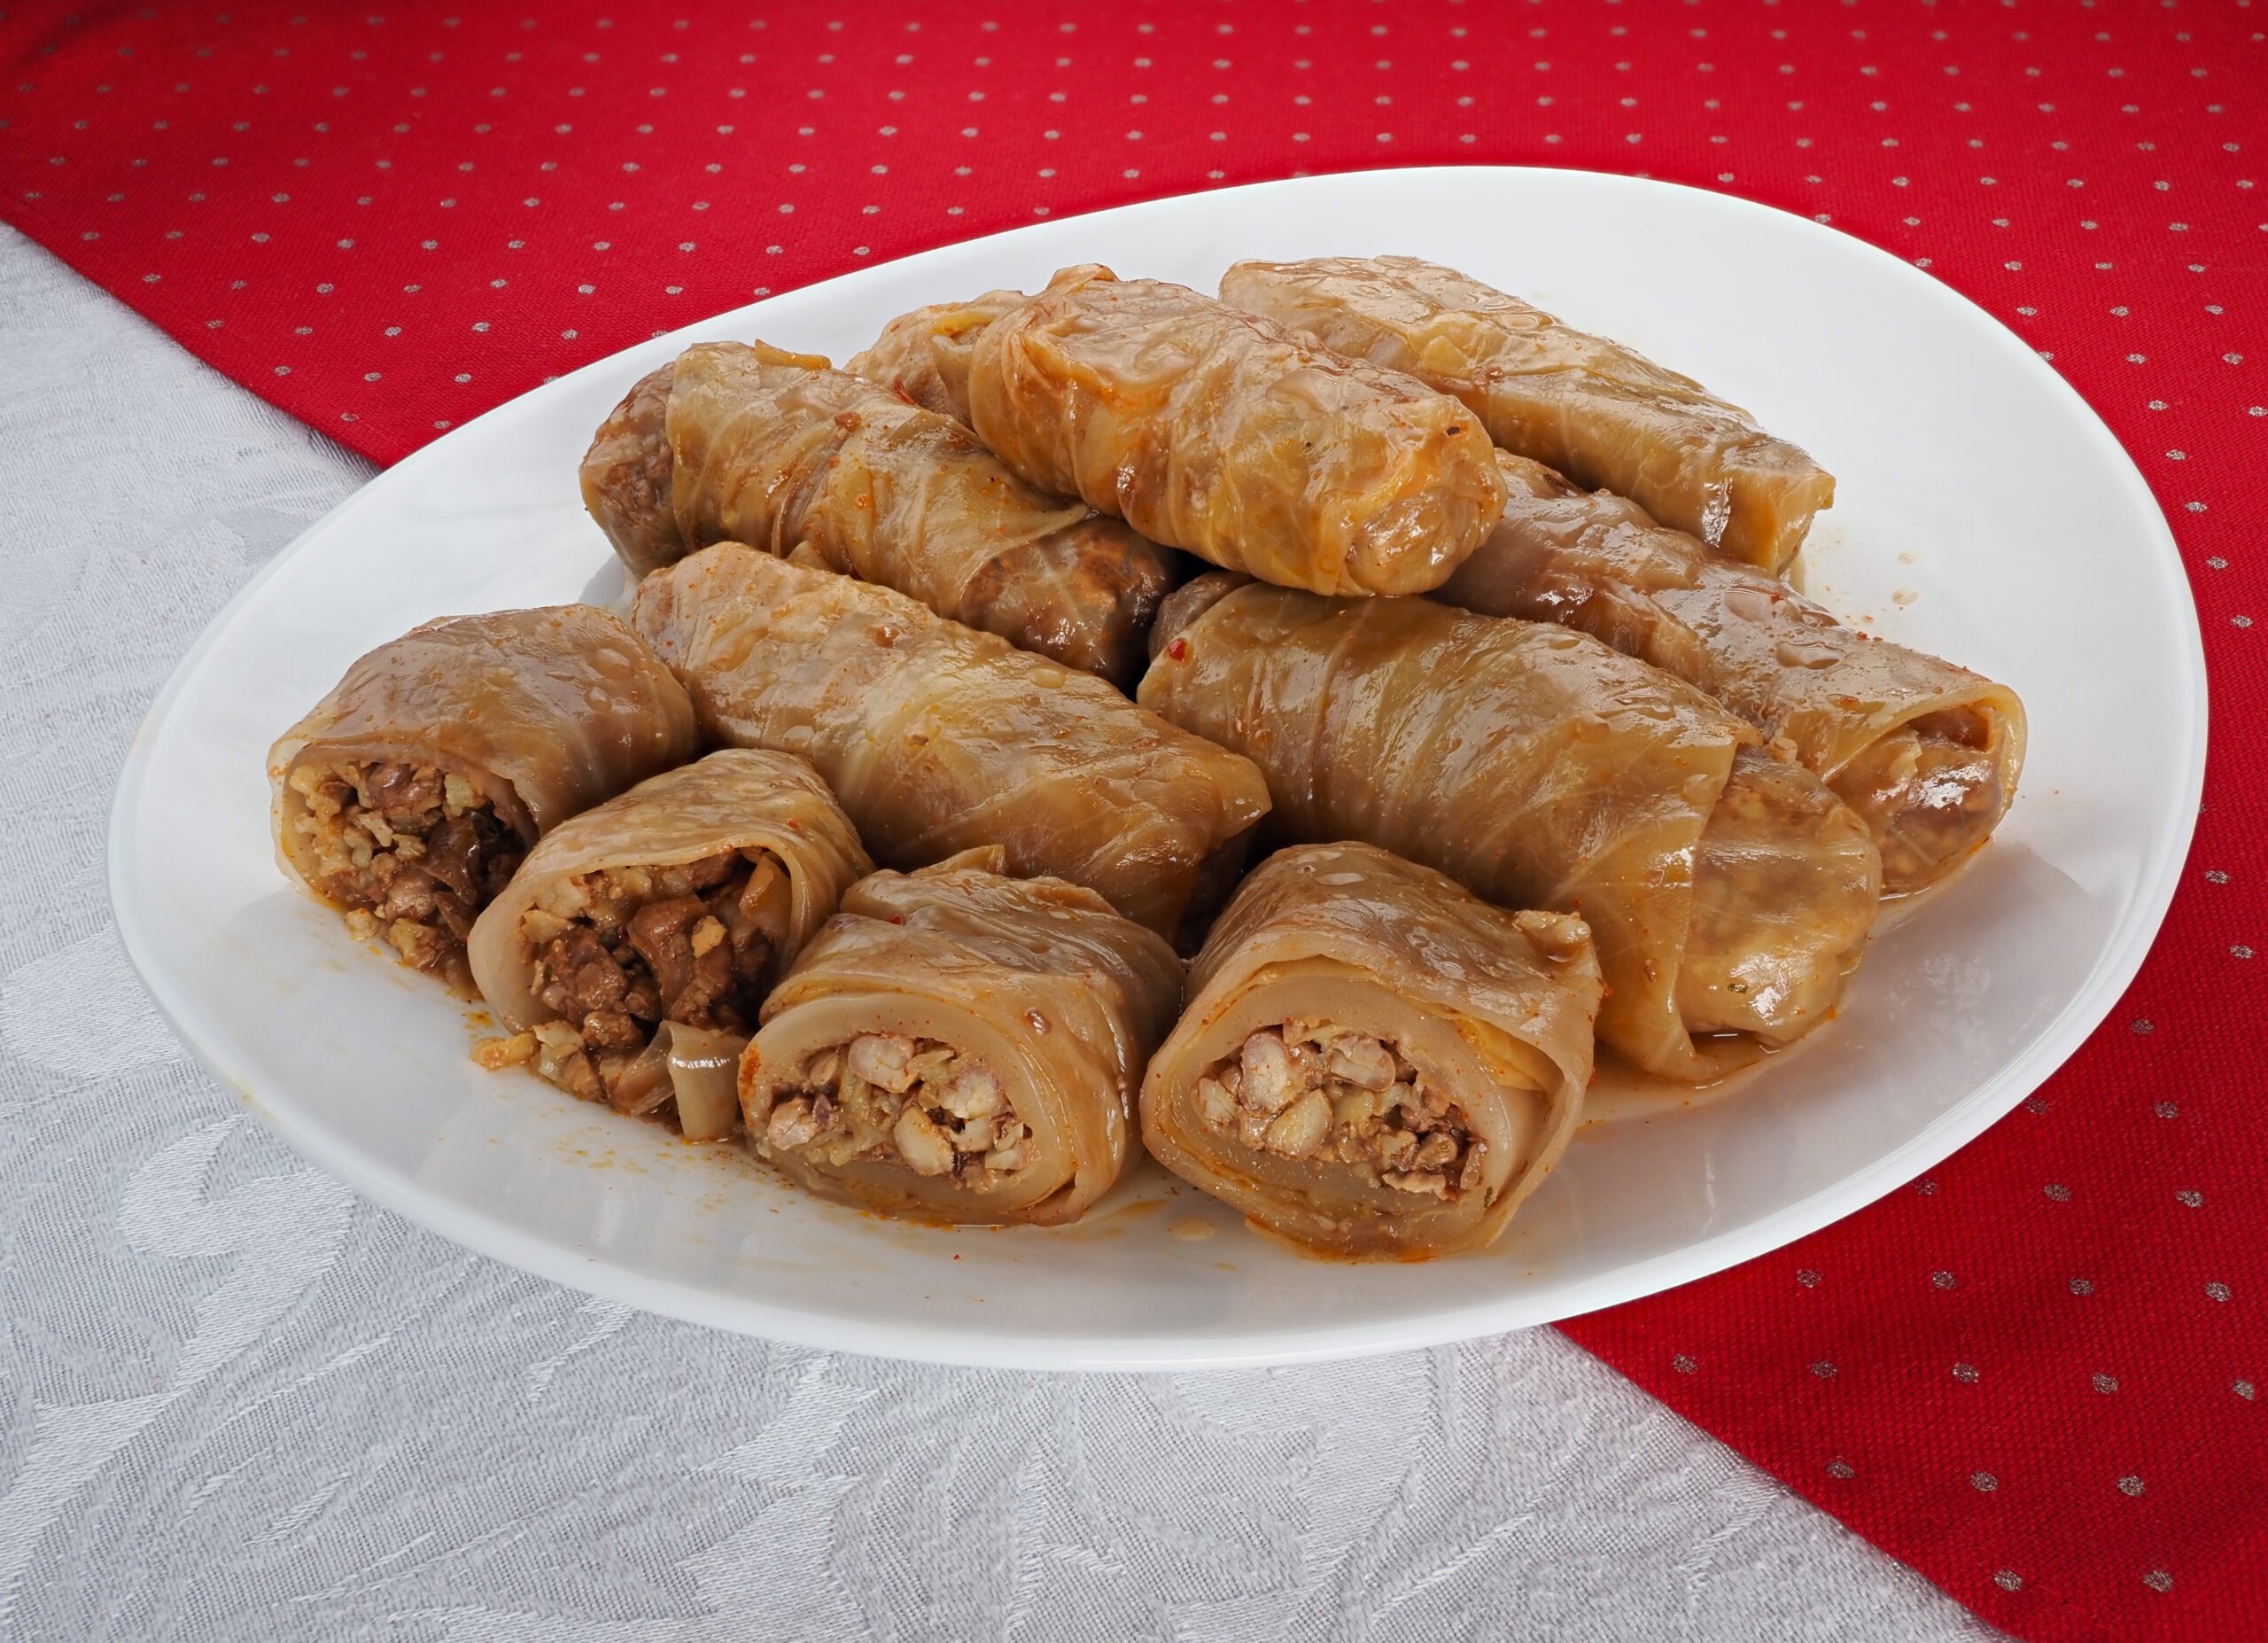 Classic Christmas Dishes in Serbia